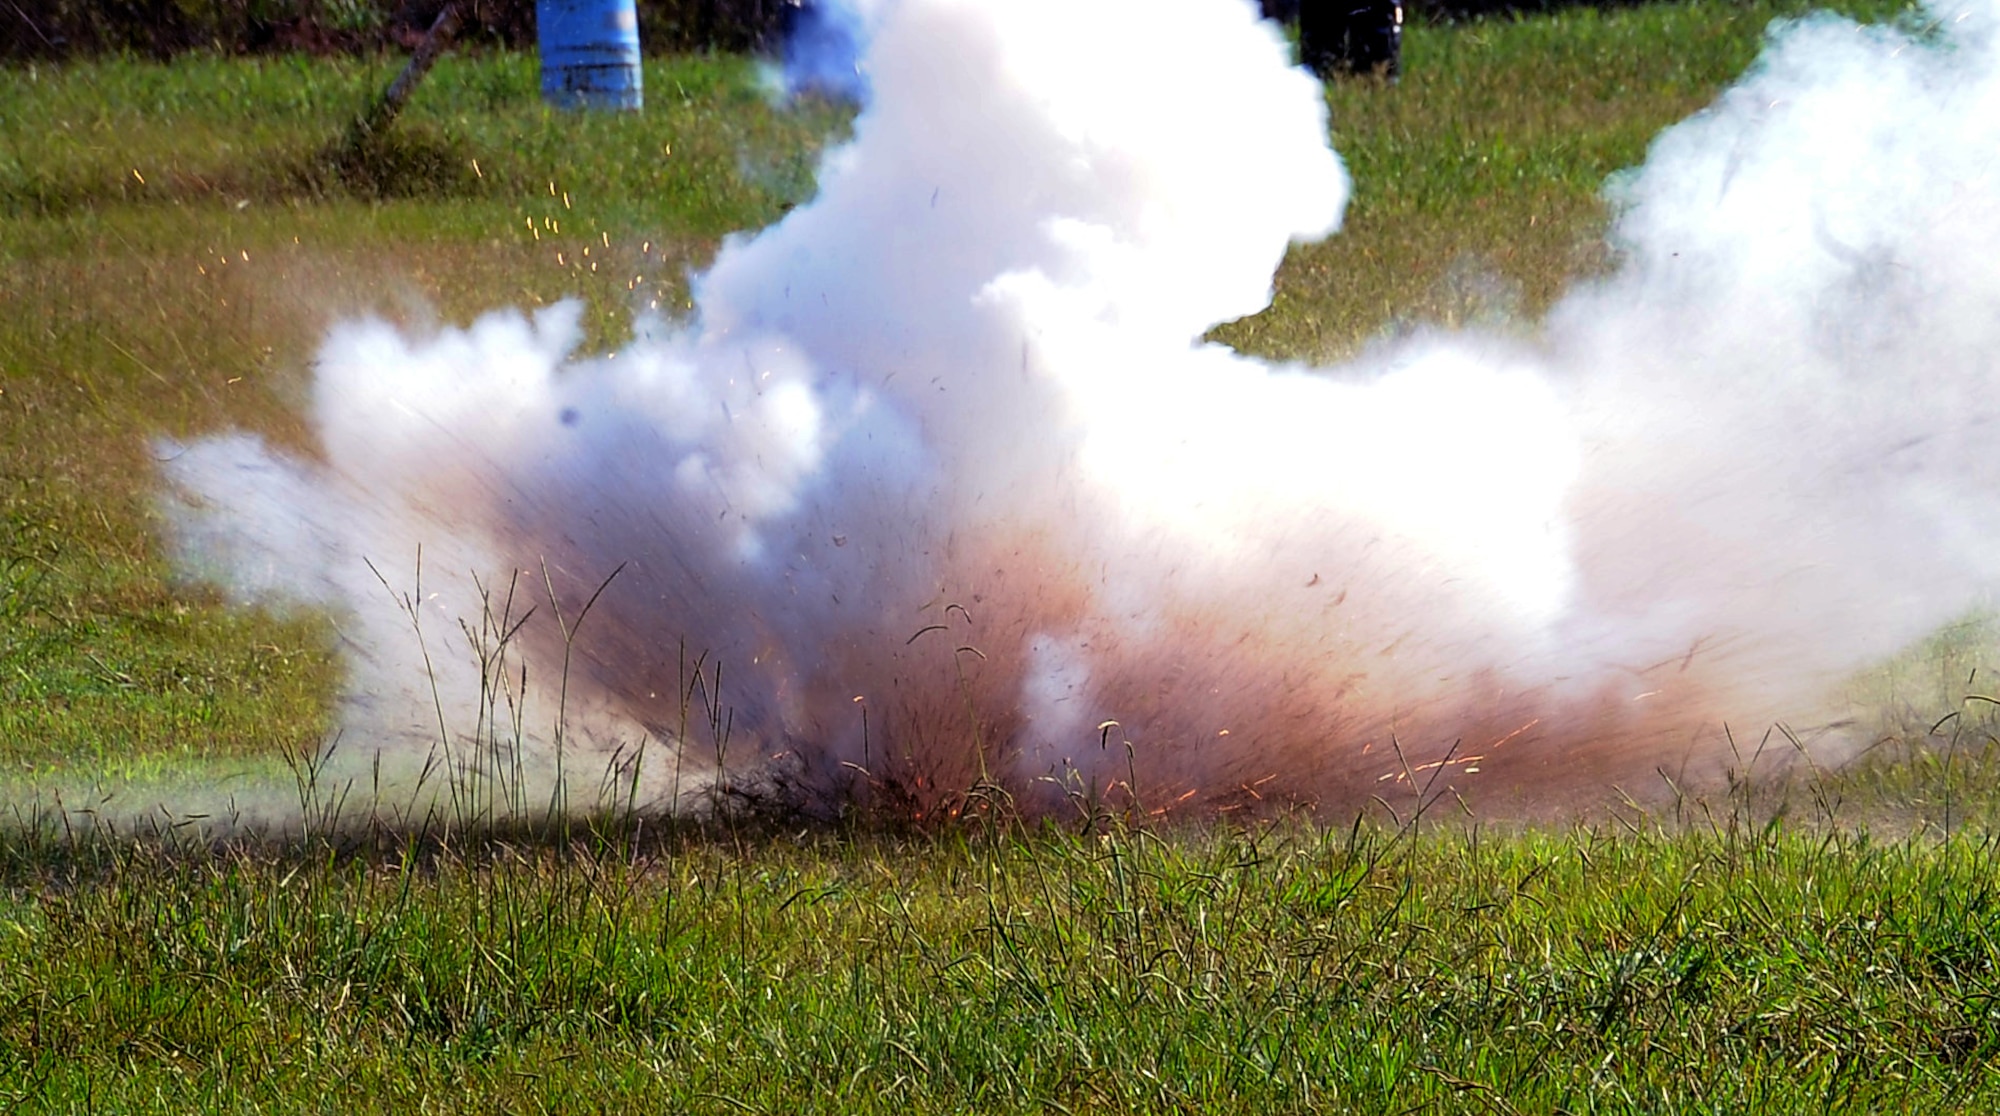 A ground burst simulator explodes at the 2nd Civil Engineer Squadron Explosive Ordnance Disposal facility on Barksdale Air Force Base, La., Sept. 18. EOD technicians taught 11 Barksdale personnel how to safely handle, employ and operate pyrotechnic devices as well as misfire procedures and emergency actions. (U.S. Air Force photo/Staff Sgt. Amber Ashcraft)(RELEASED)